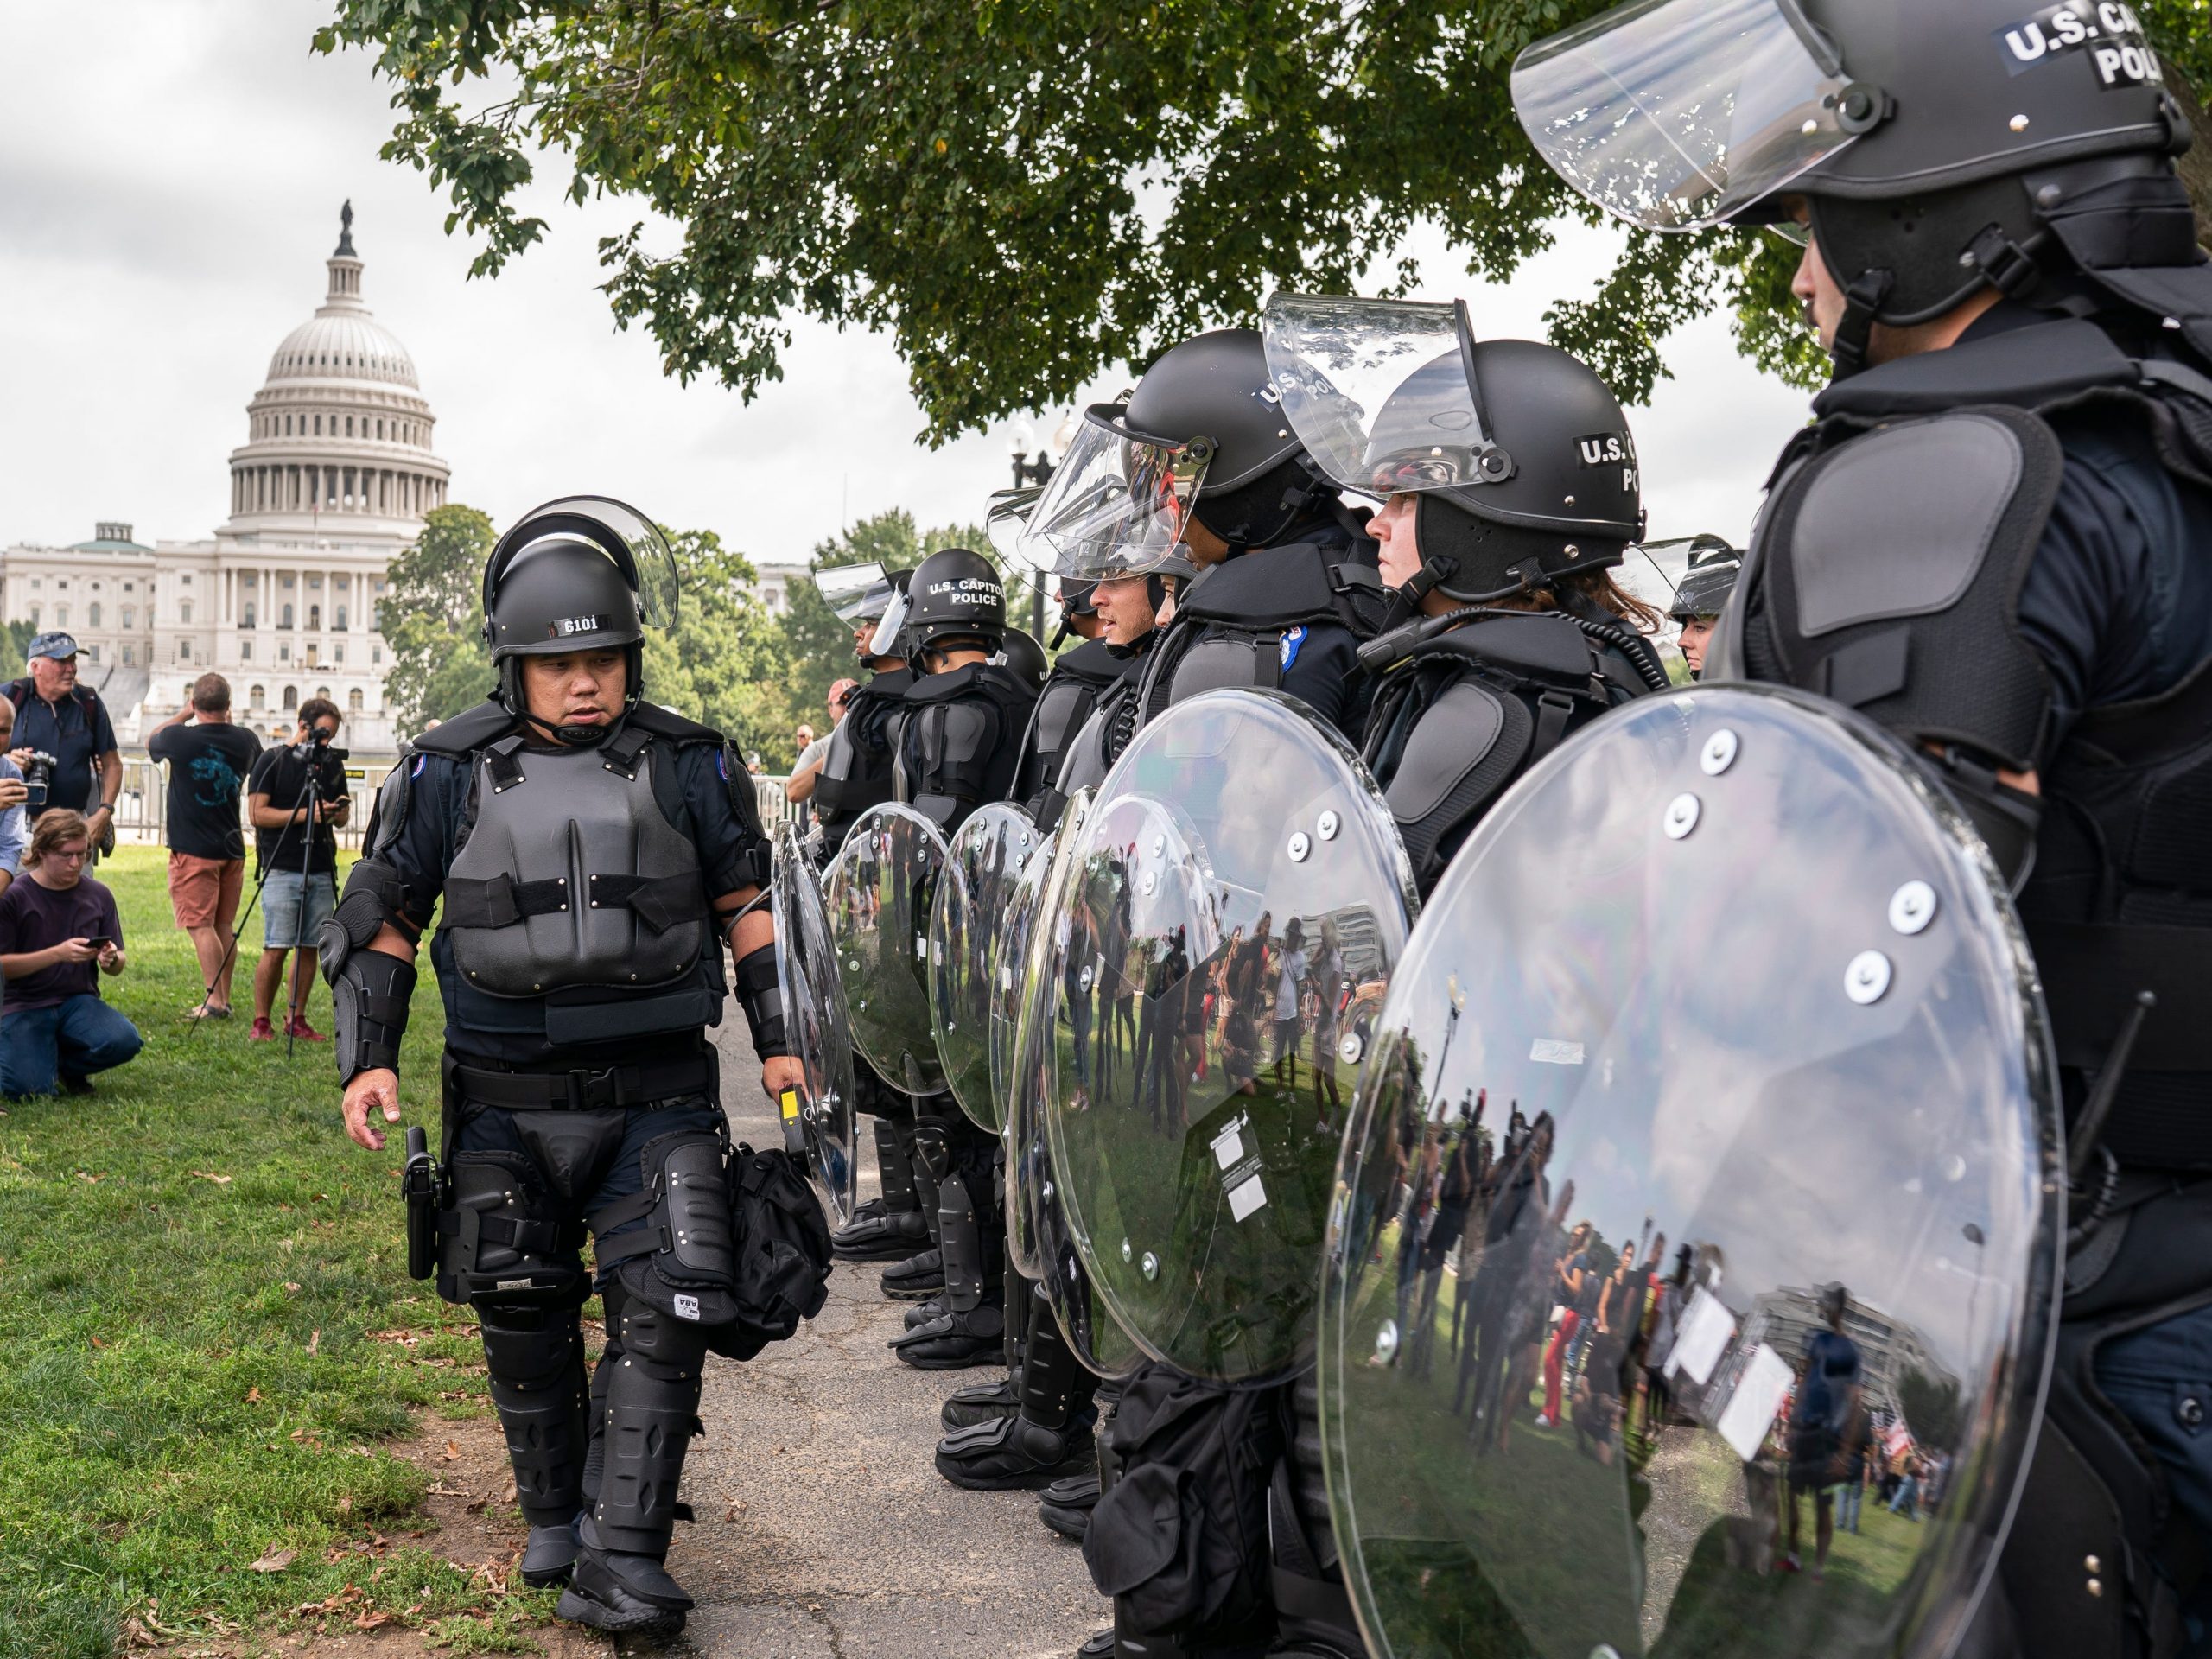 Police in riot gear observe the Justice for J6 rally near the U.S. Capitol in Washington, Saturday, Sept. 18, 2021.